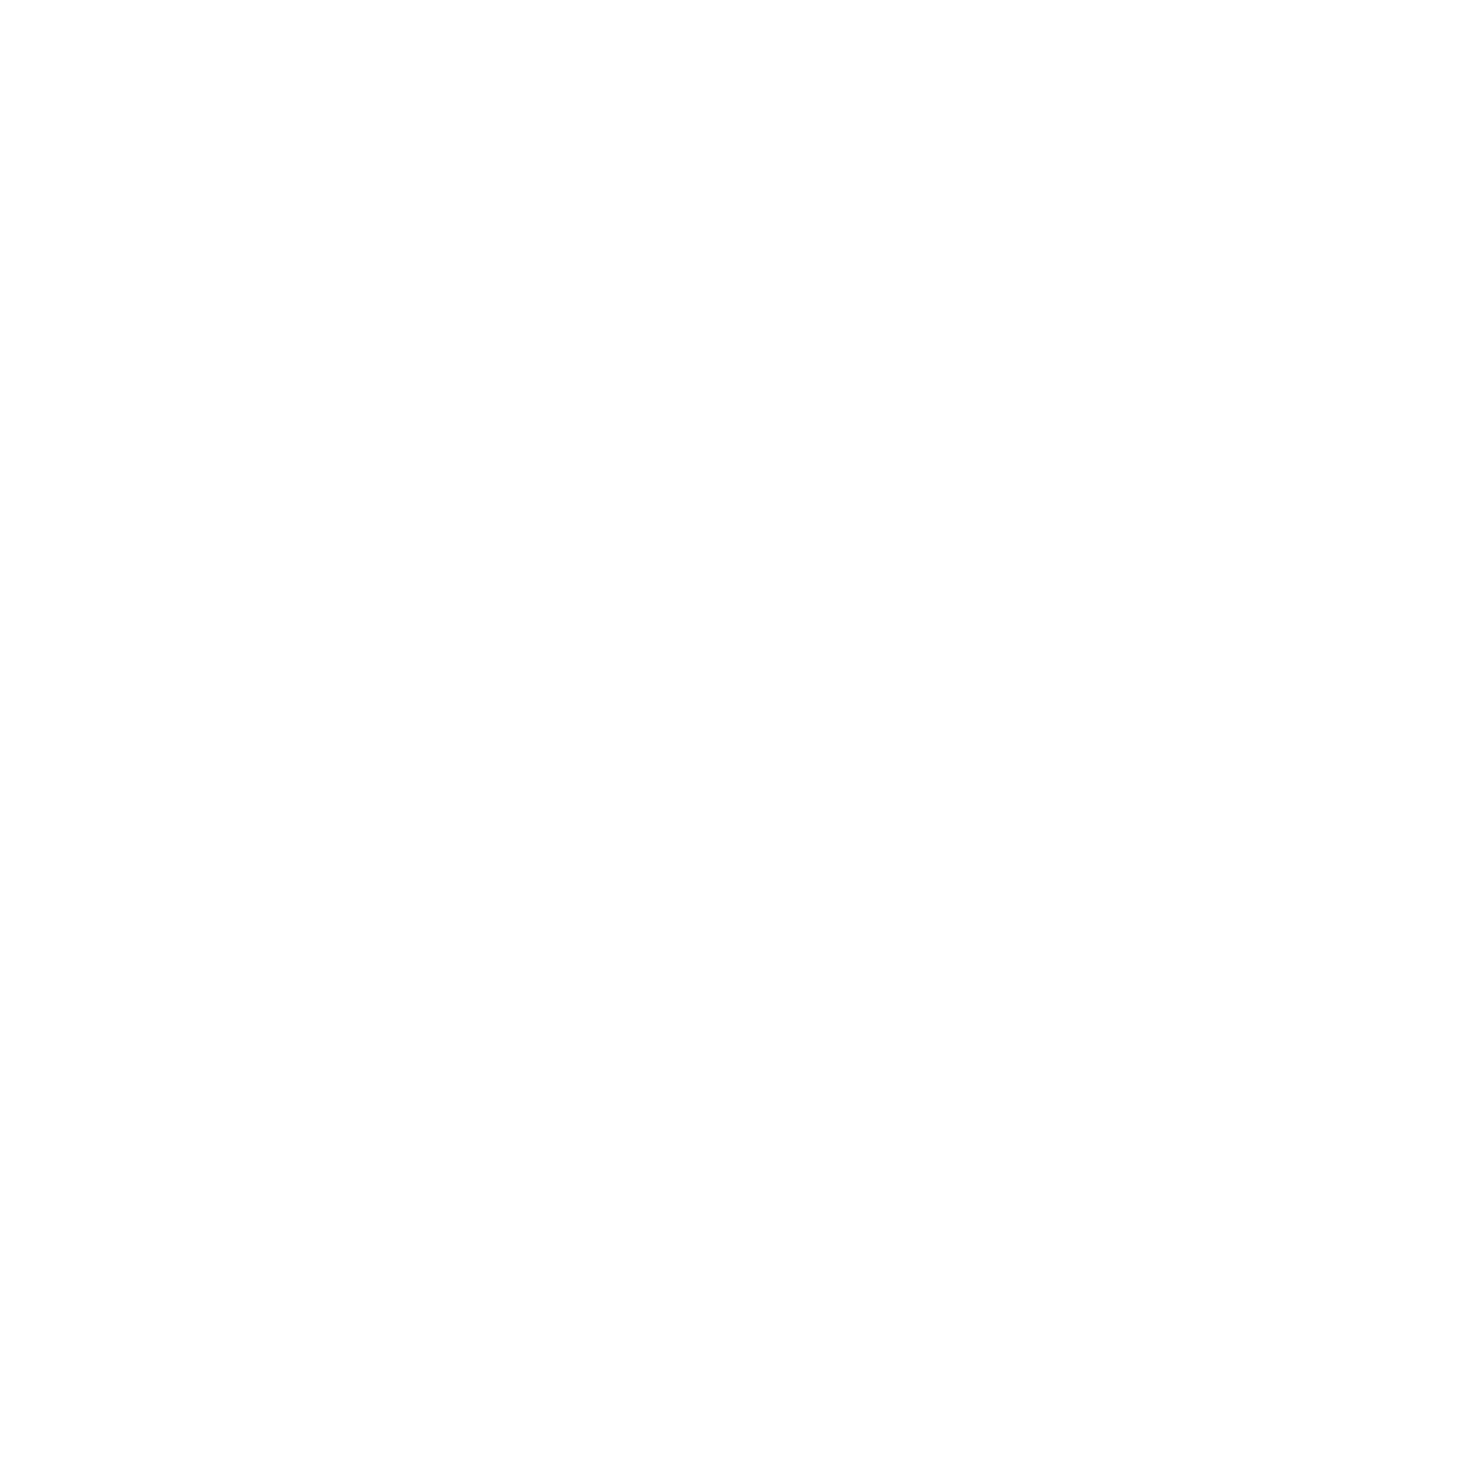 The Hair and Makeup Box